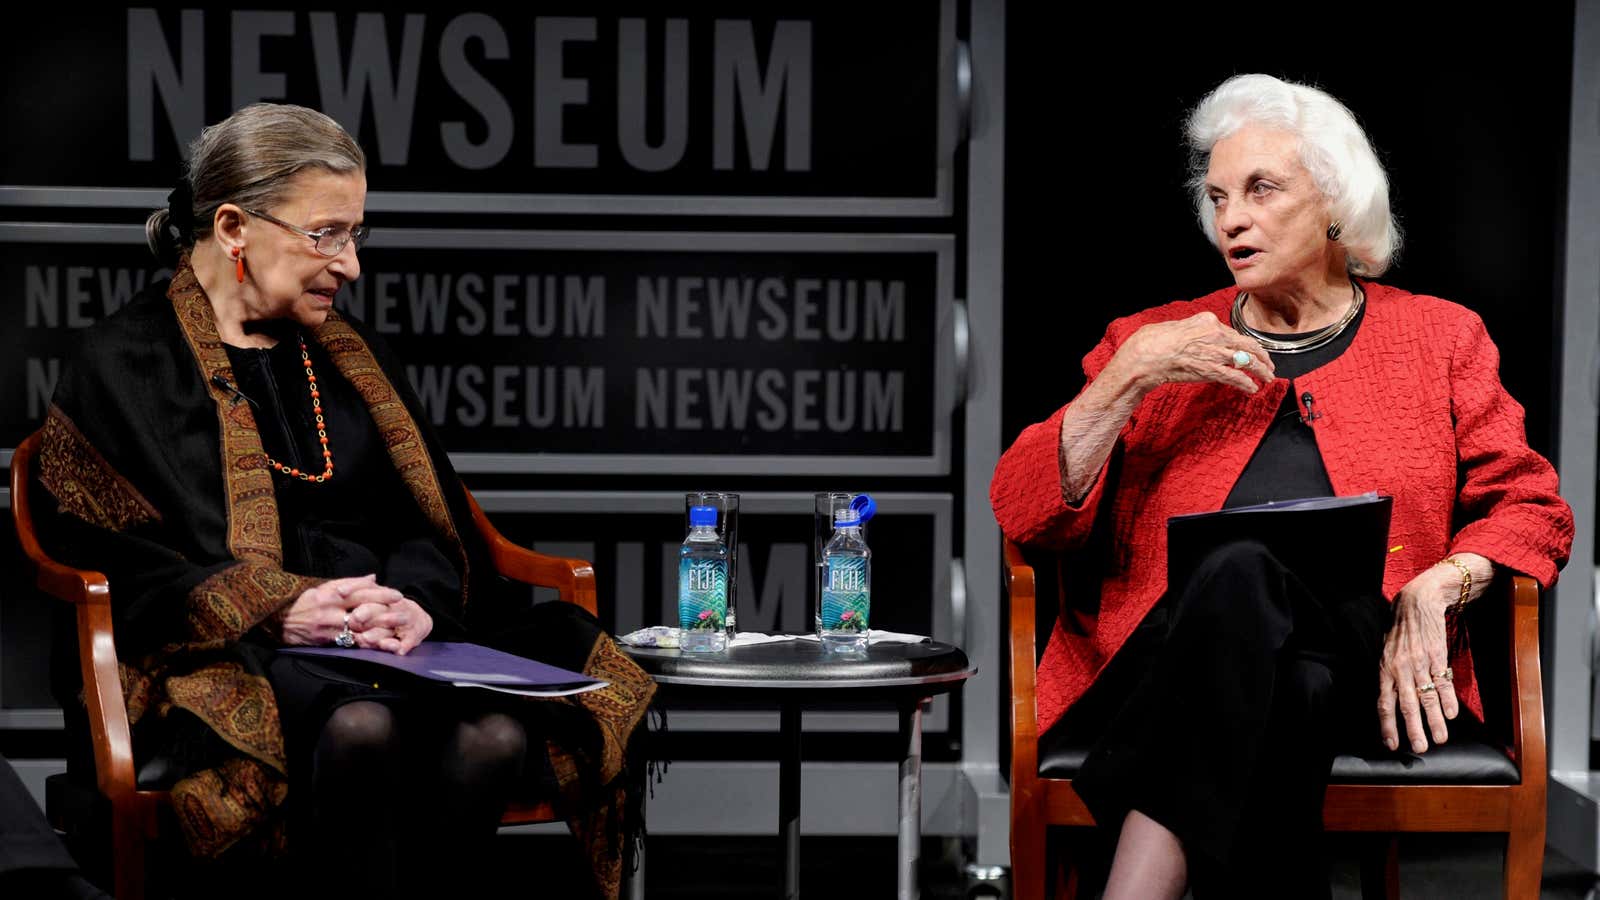 Giants of the law, Ruth Bader Ginsburg and Sandra Day O’Connor.